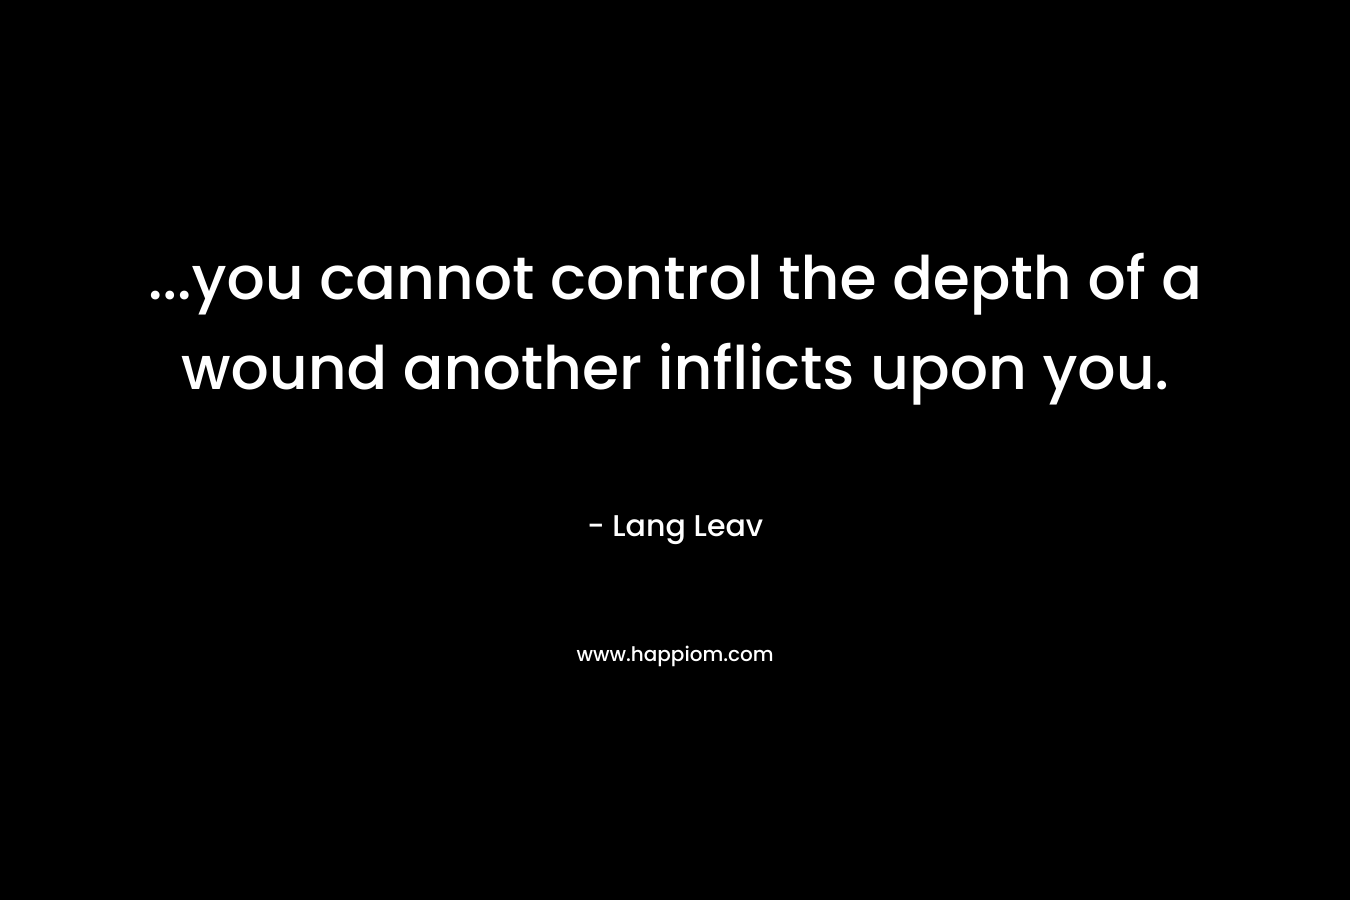 ...you cannot control the depth of a wound another inflicts upon you.